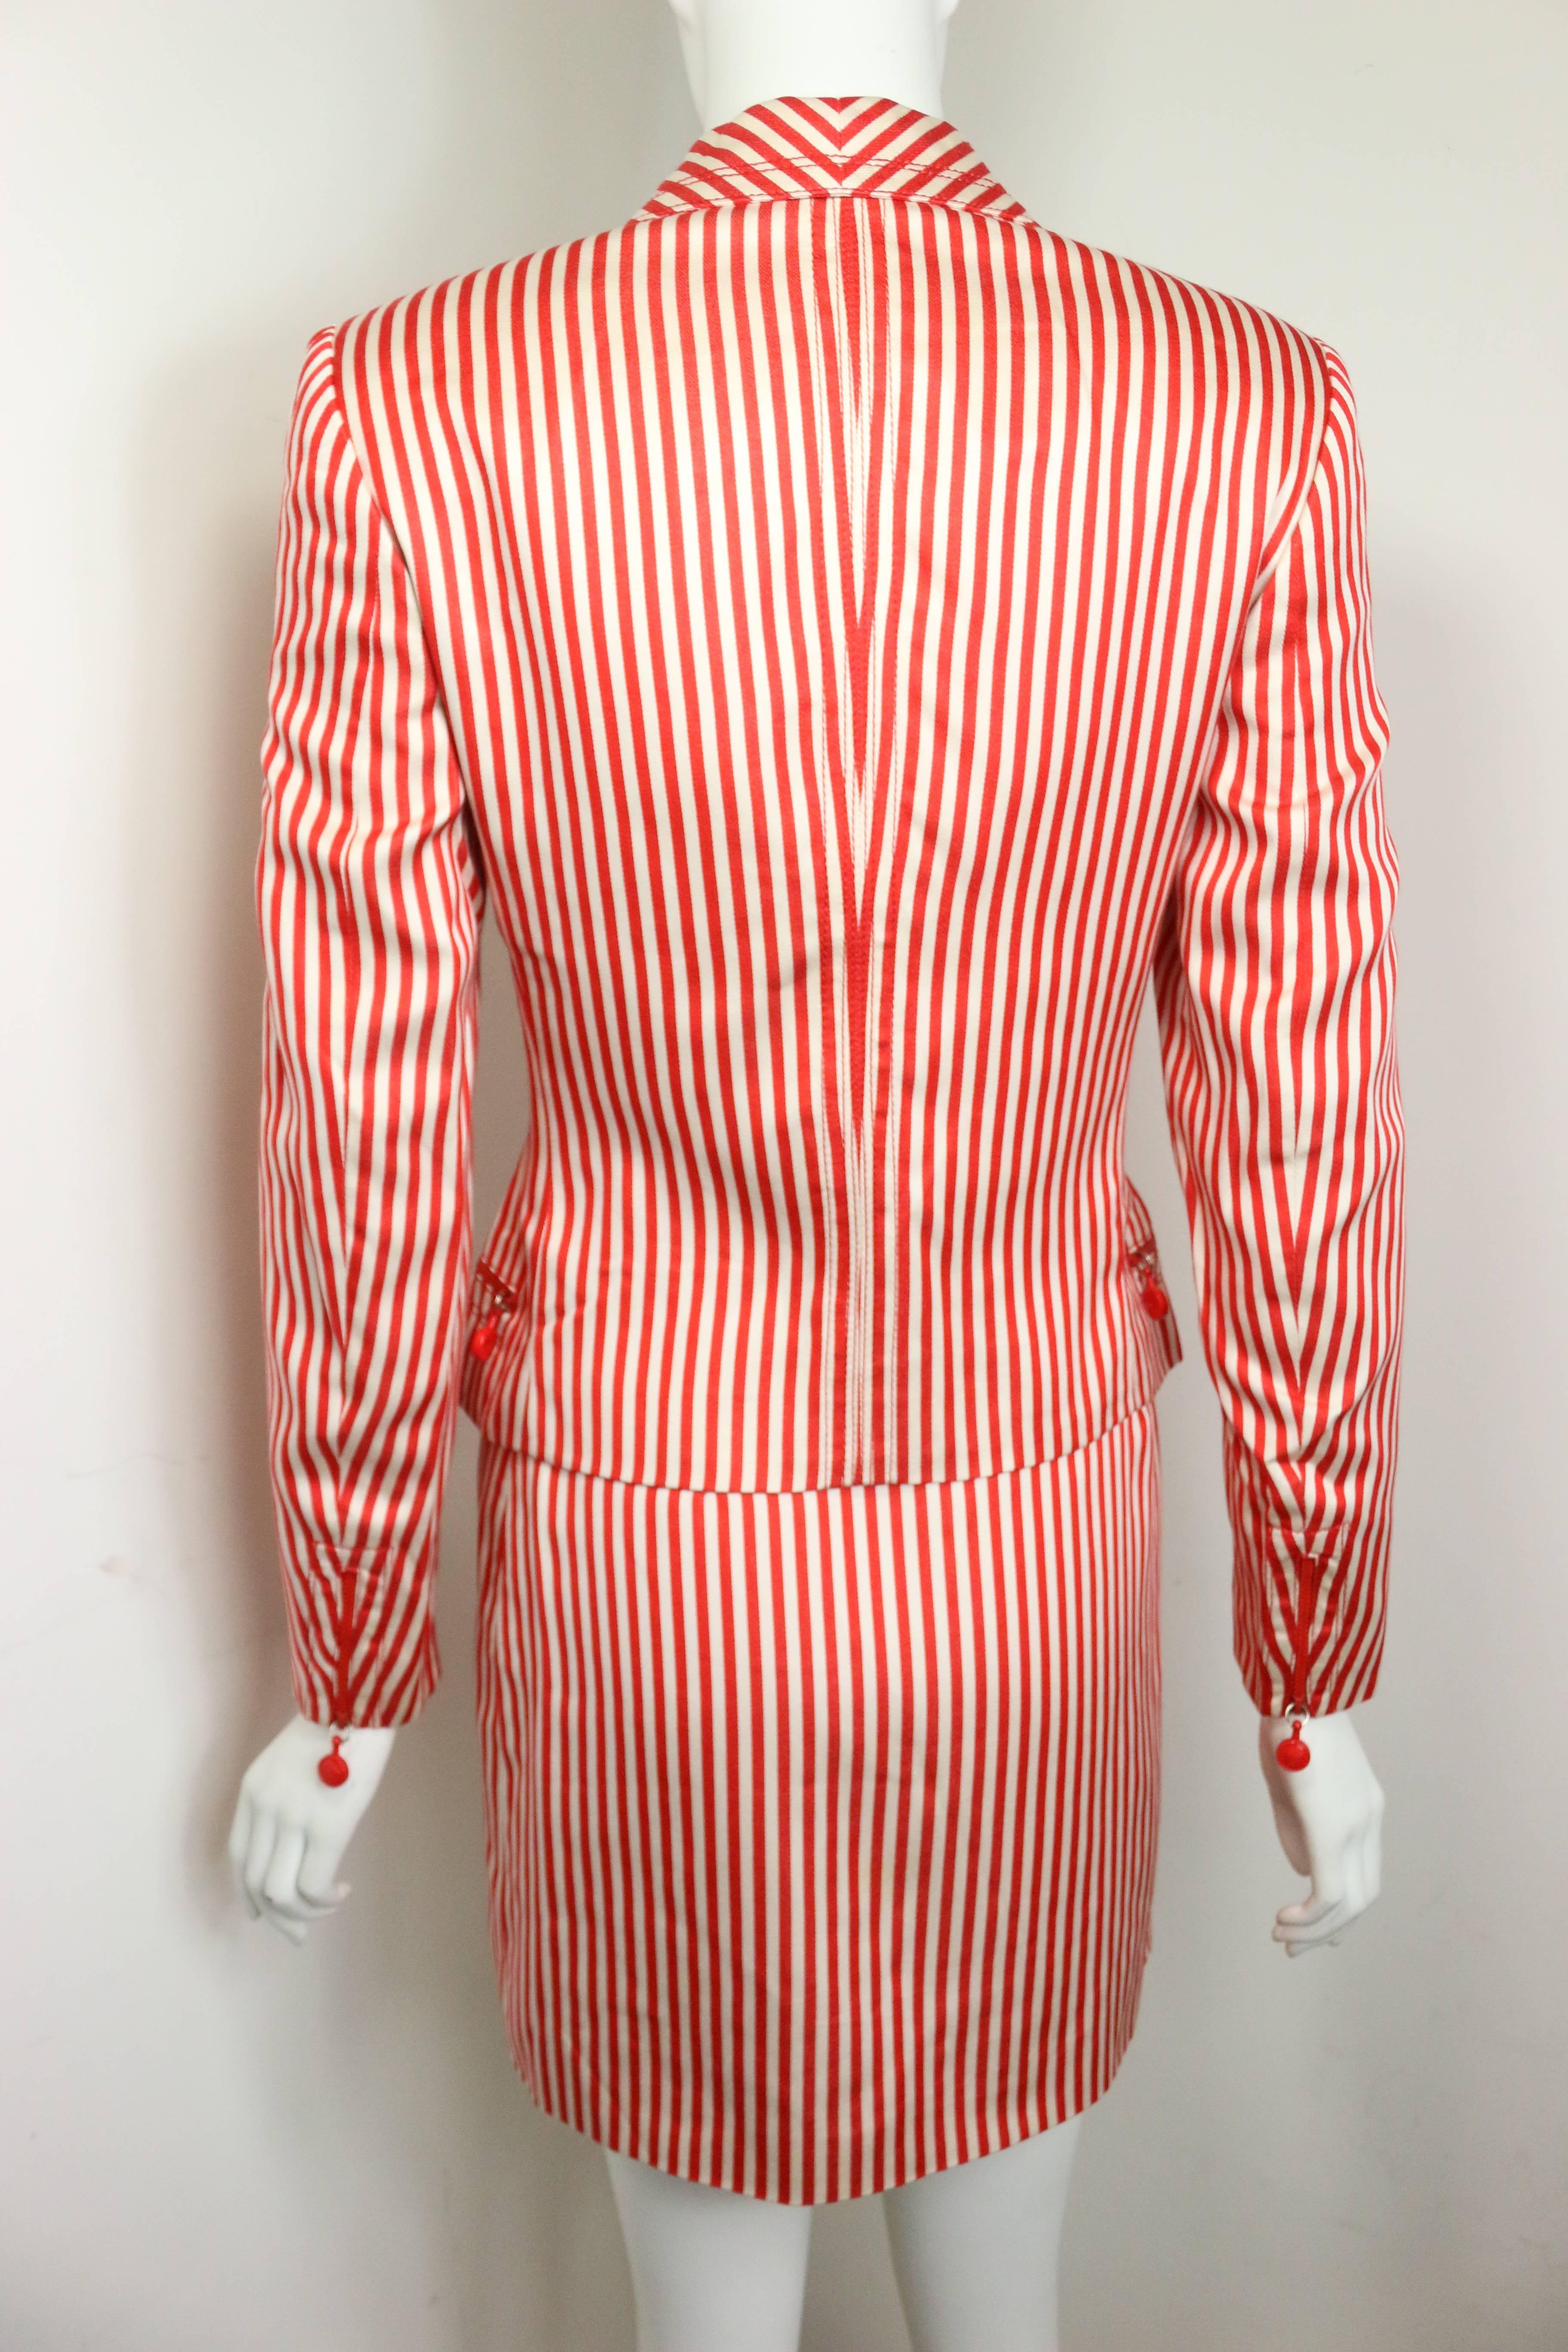 - Vintage 90s Gianni Versace Couture red and white stripe silk jacket and skirt ensemble. Featuring a red "Medusa" zipper front closure and two side pockets with red "Medusa" zipper closures. Also, a red zipper closure on each